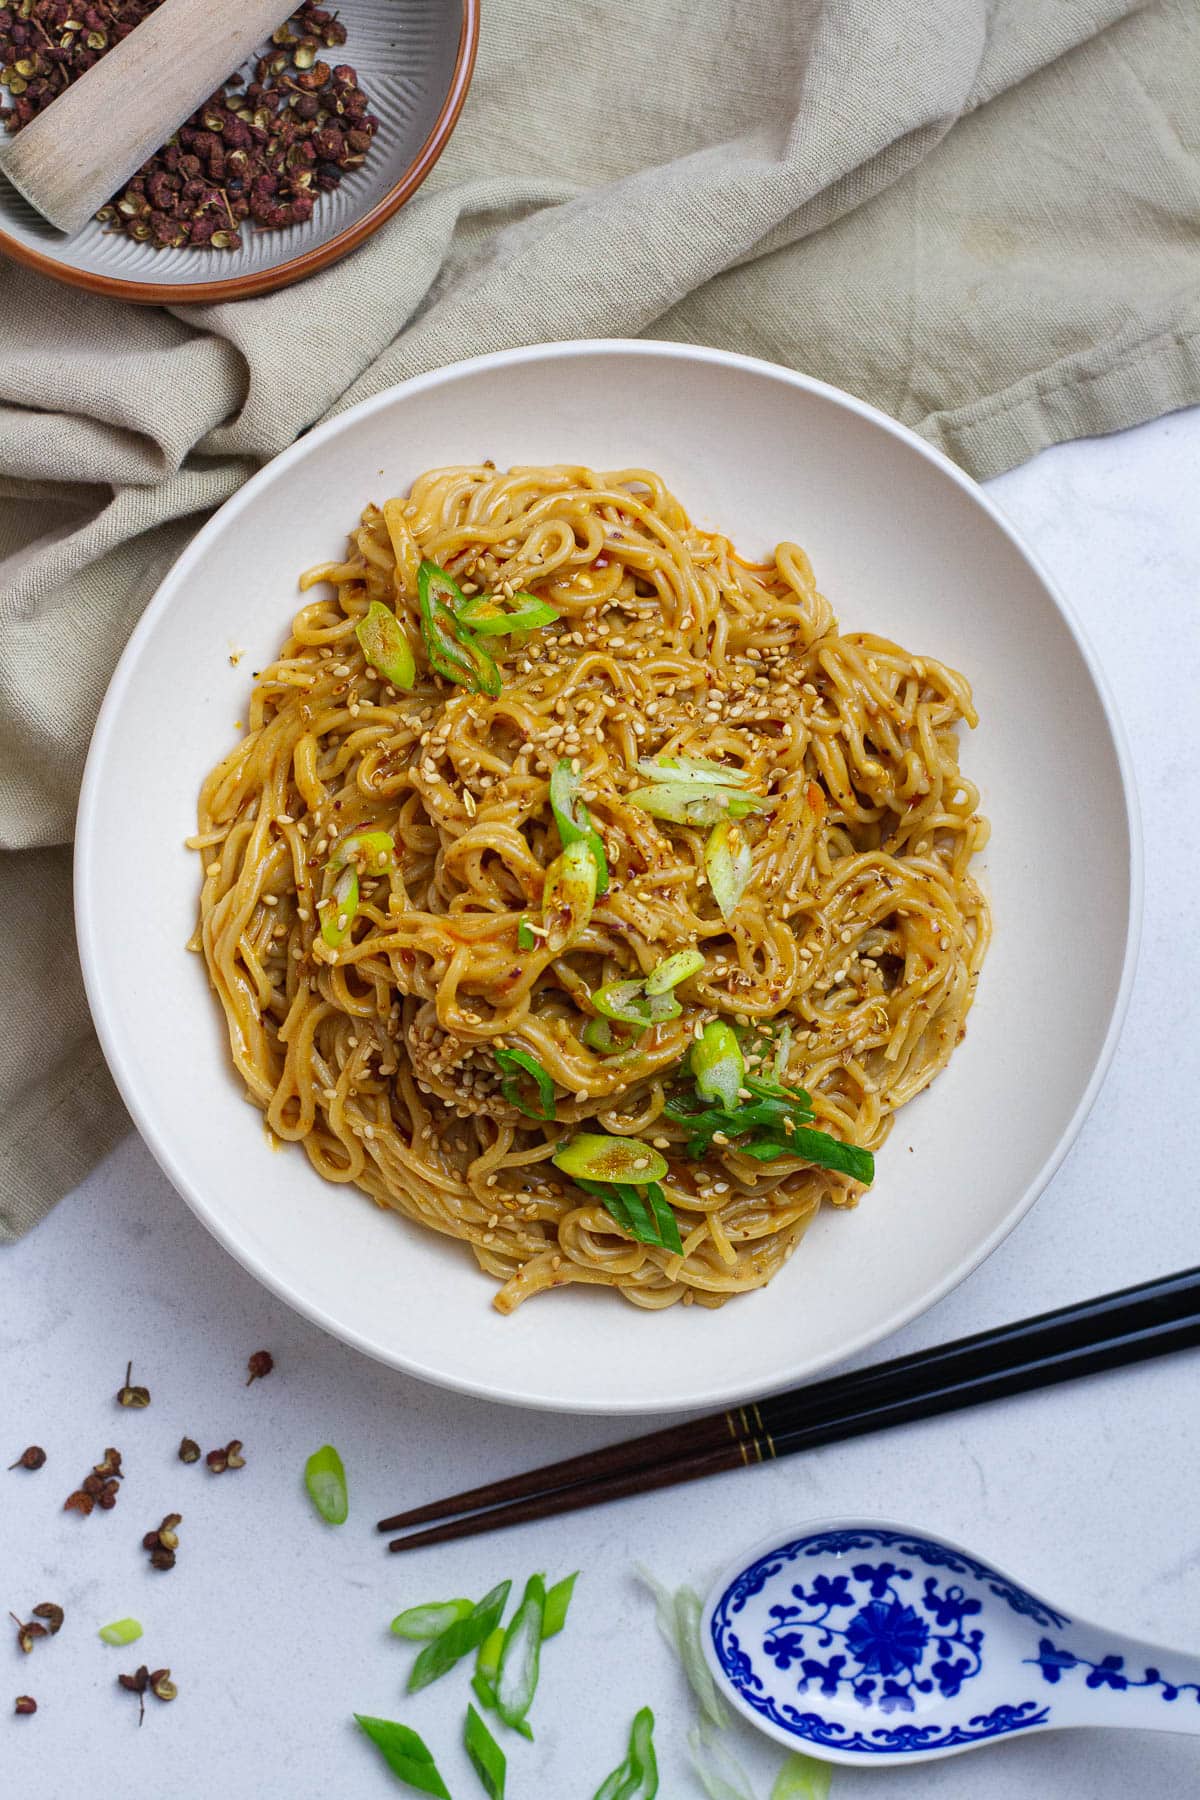 10-minute spicy Sichuan noodles recipe